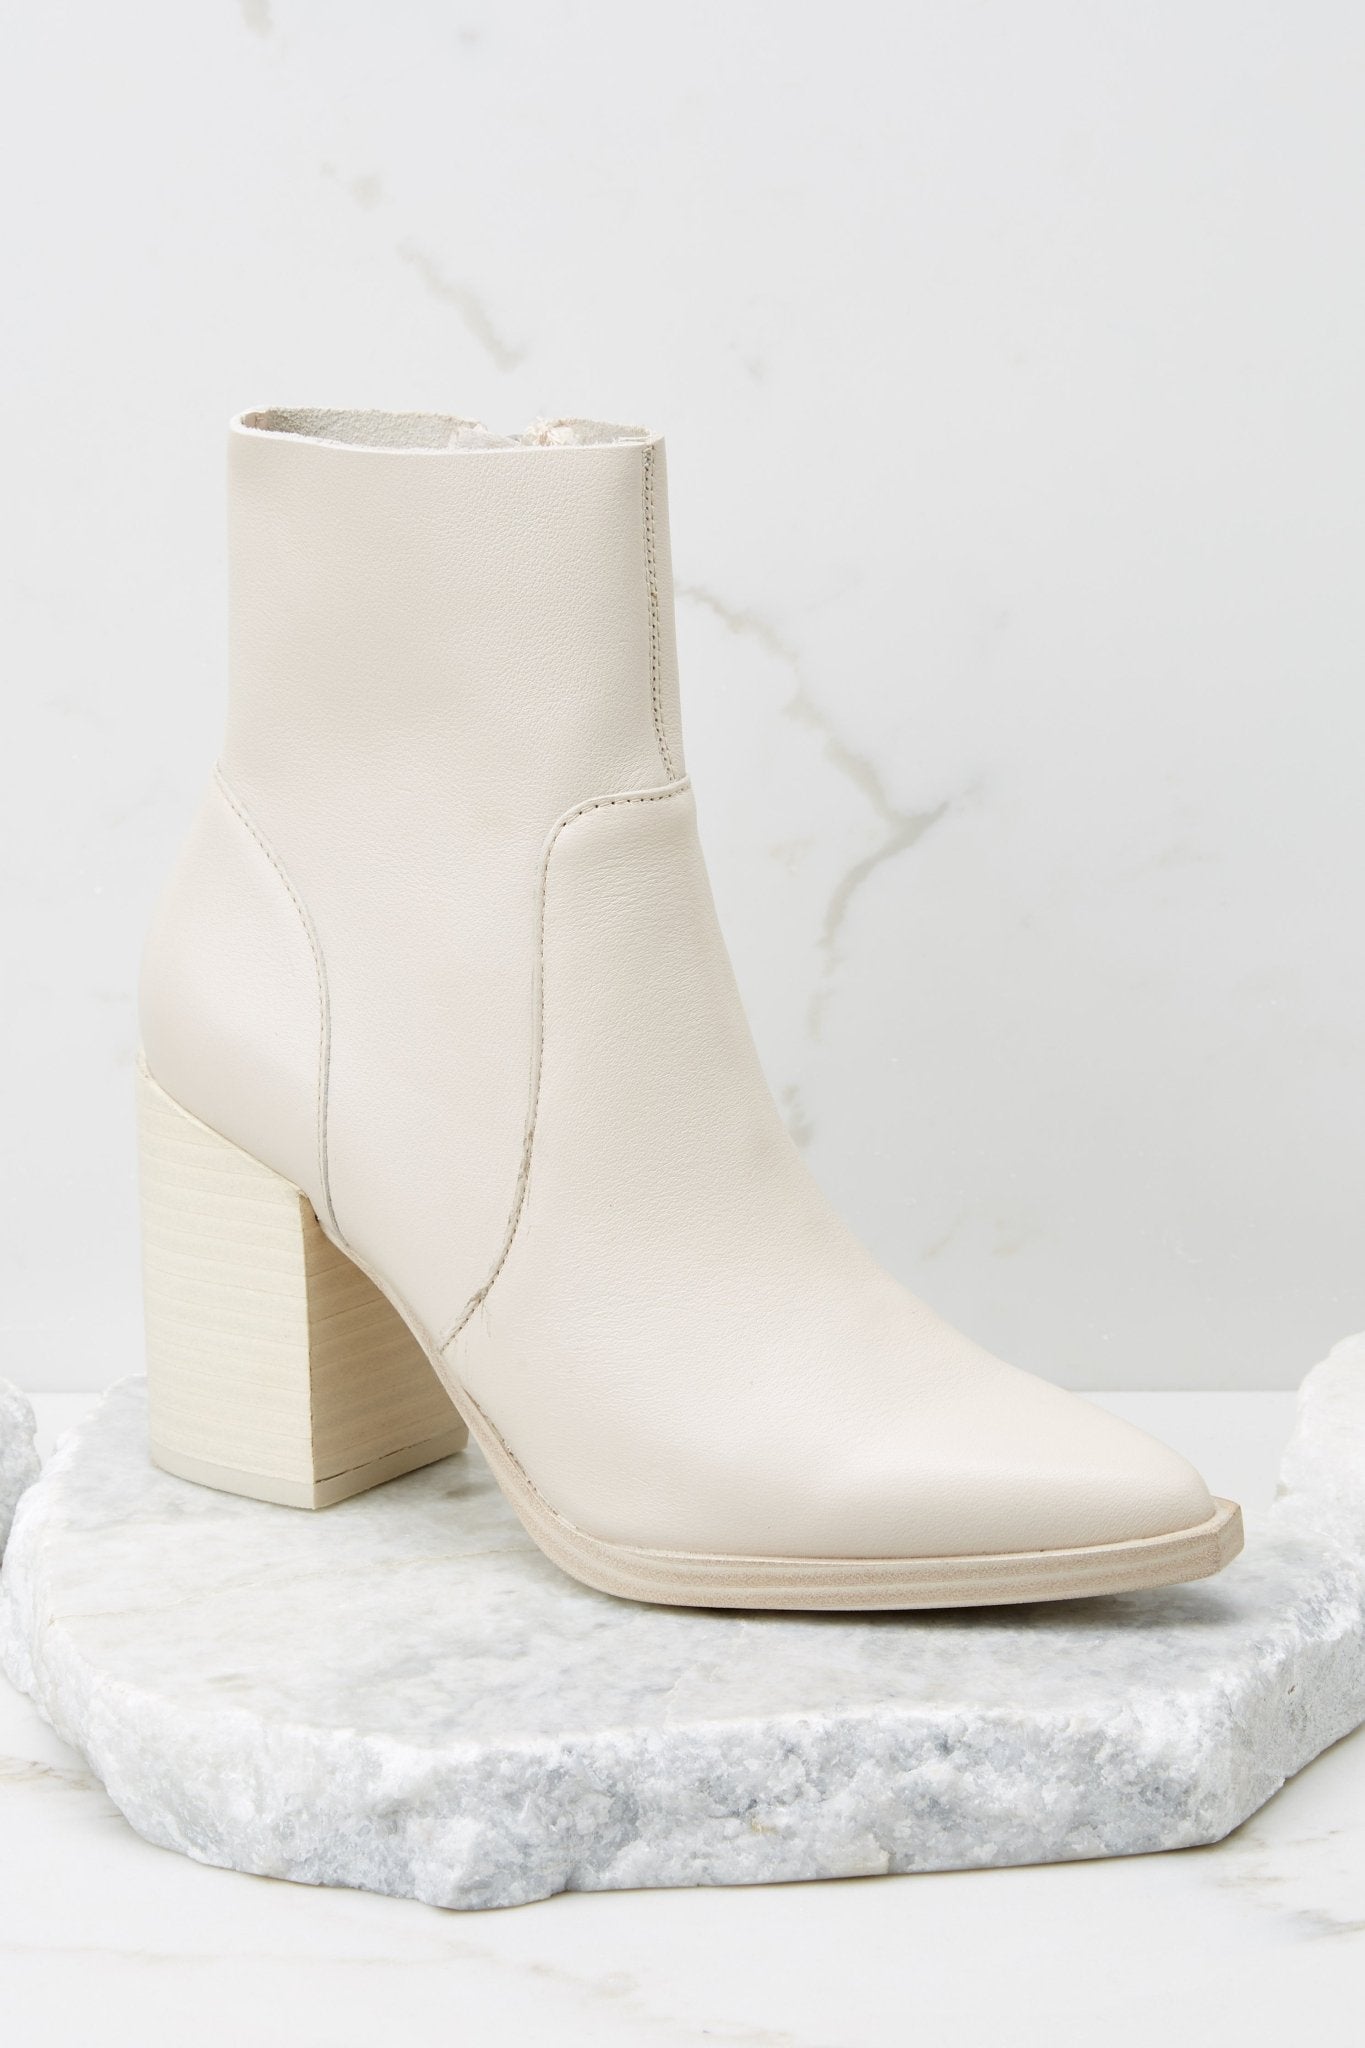 Calabria Bone Pointed Toe Bootie